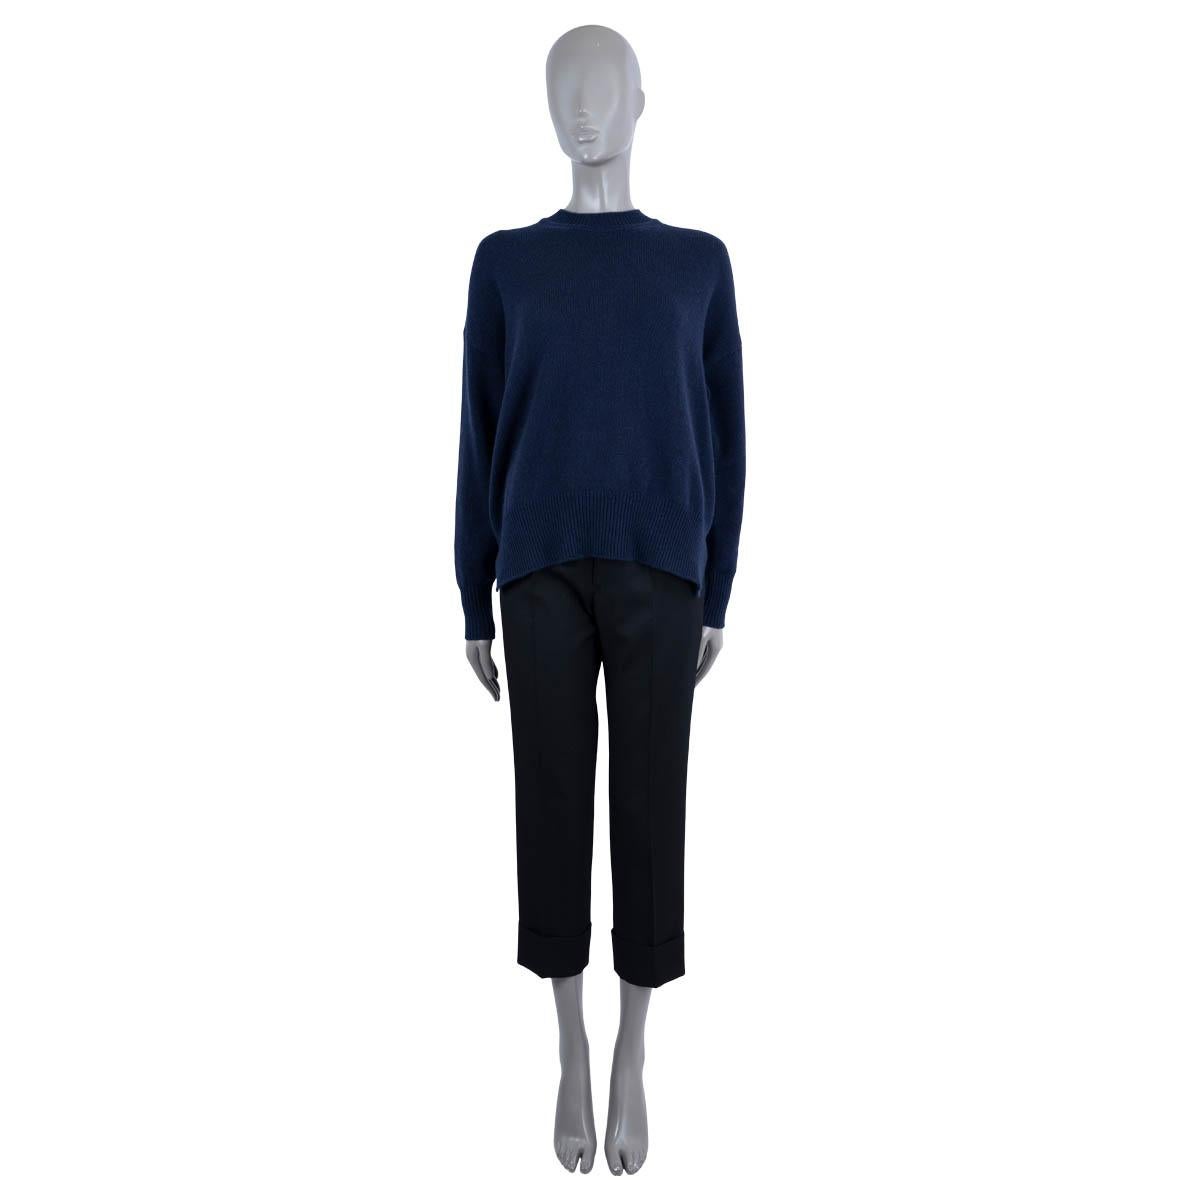 100% authentic Jil Sander sweater in navy blue cashmere (100%). Features a loose silhouette with dropped shoulders, a crewneck, side slits and wide ribbed hem and cuffs. Has been worn and is in excellent condition.

Measurements
Tag